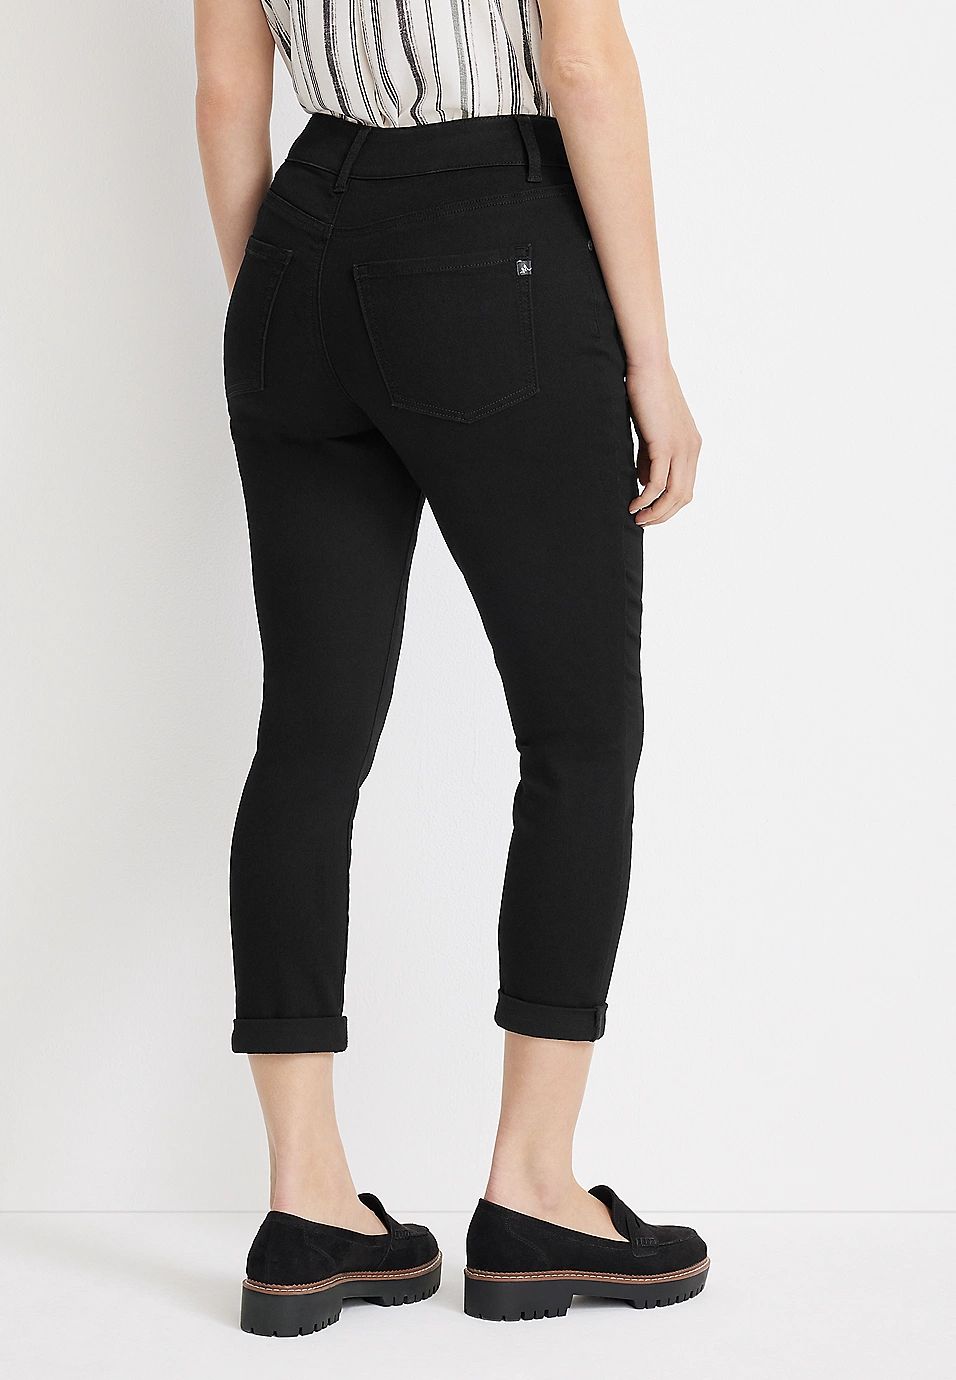 m jeans by maurices™ Cool Comfort Curvy Cropped High Rise Jegging | Maurices